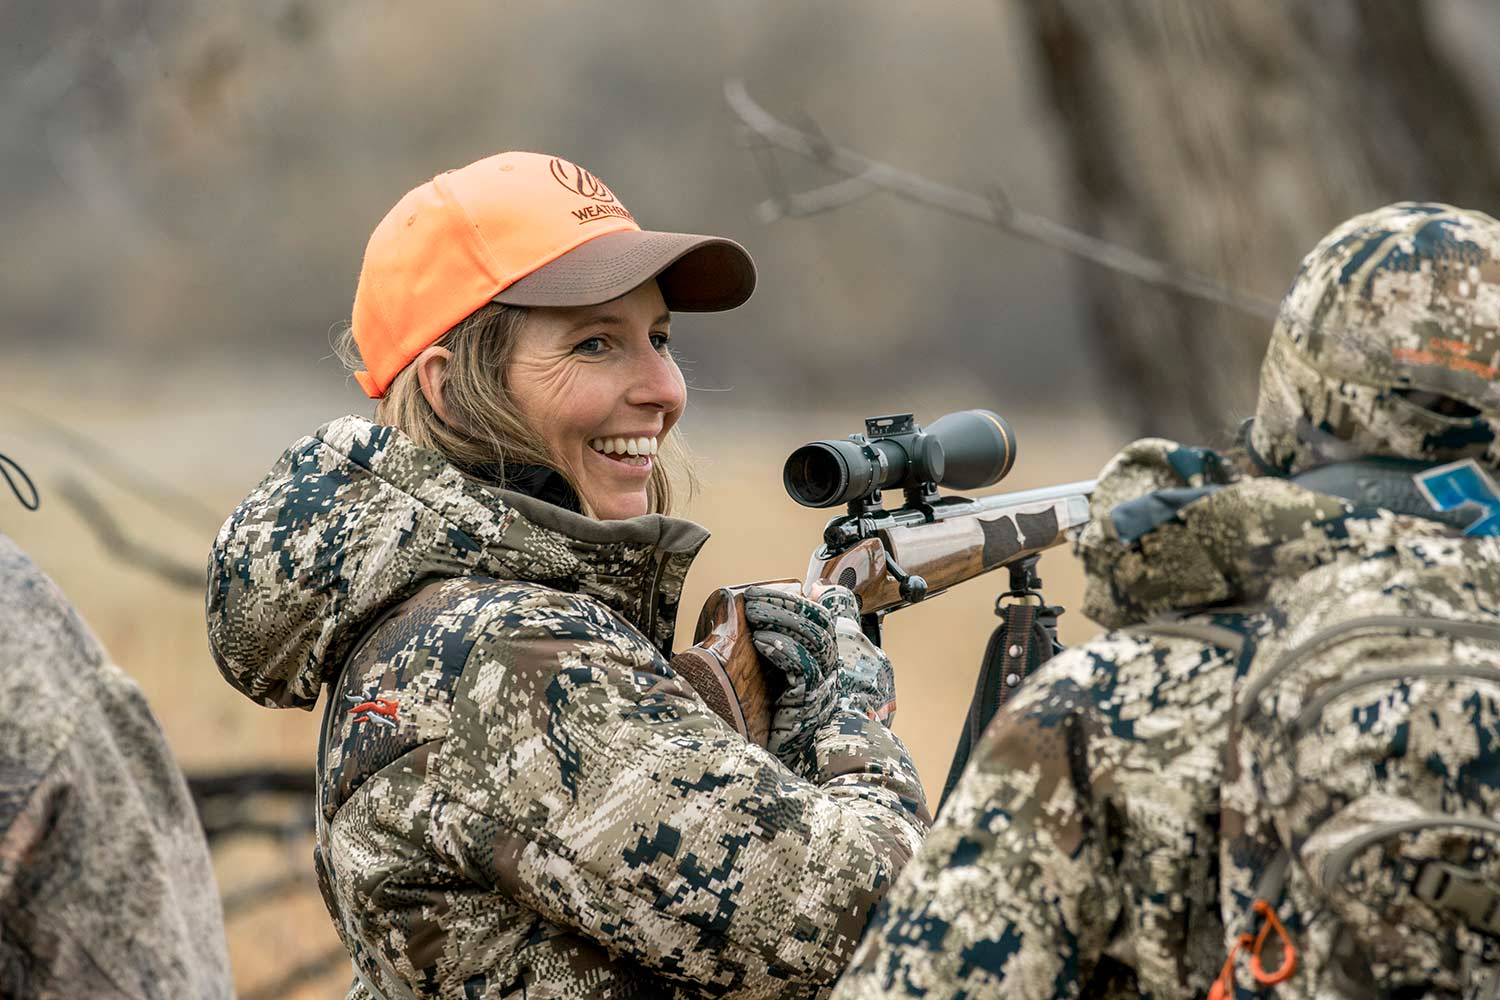 A female hunter smiles and aims a rifle with the help of hunting mentors and shooting sticks.